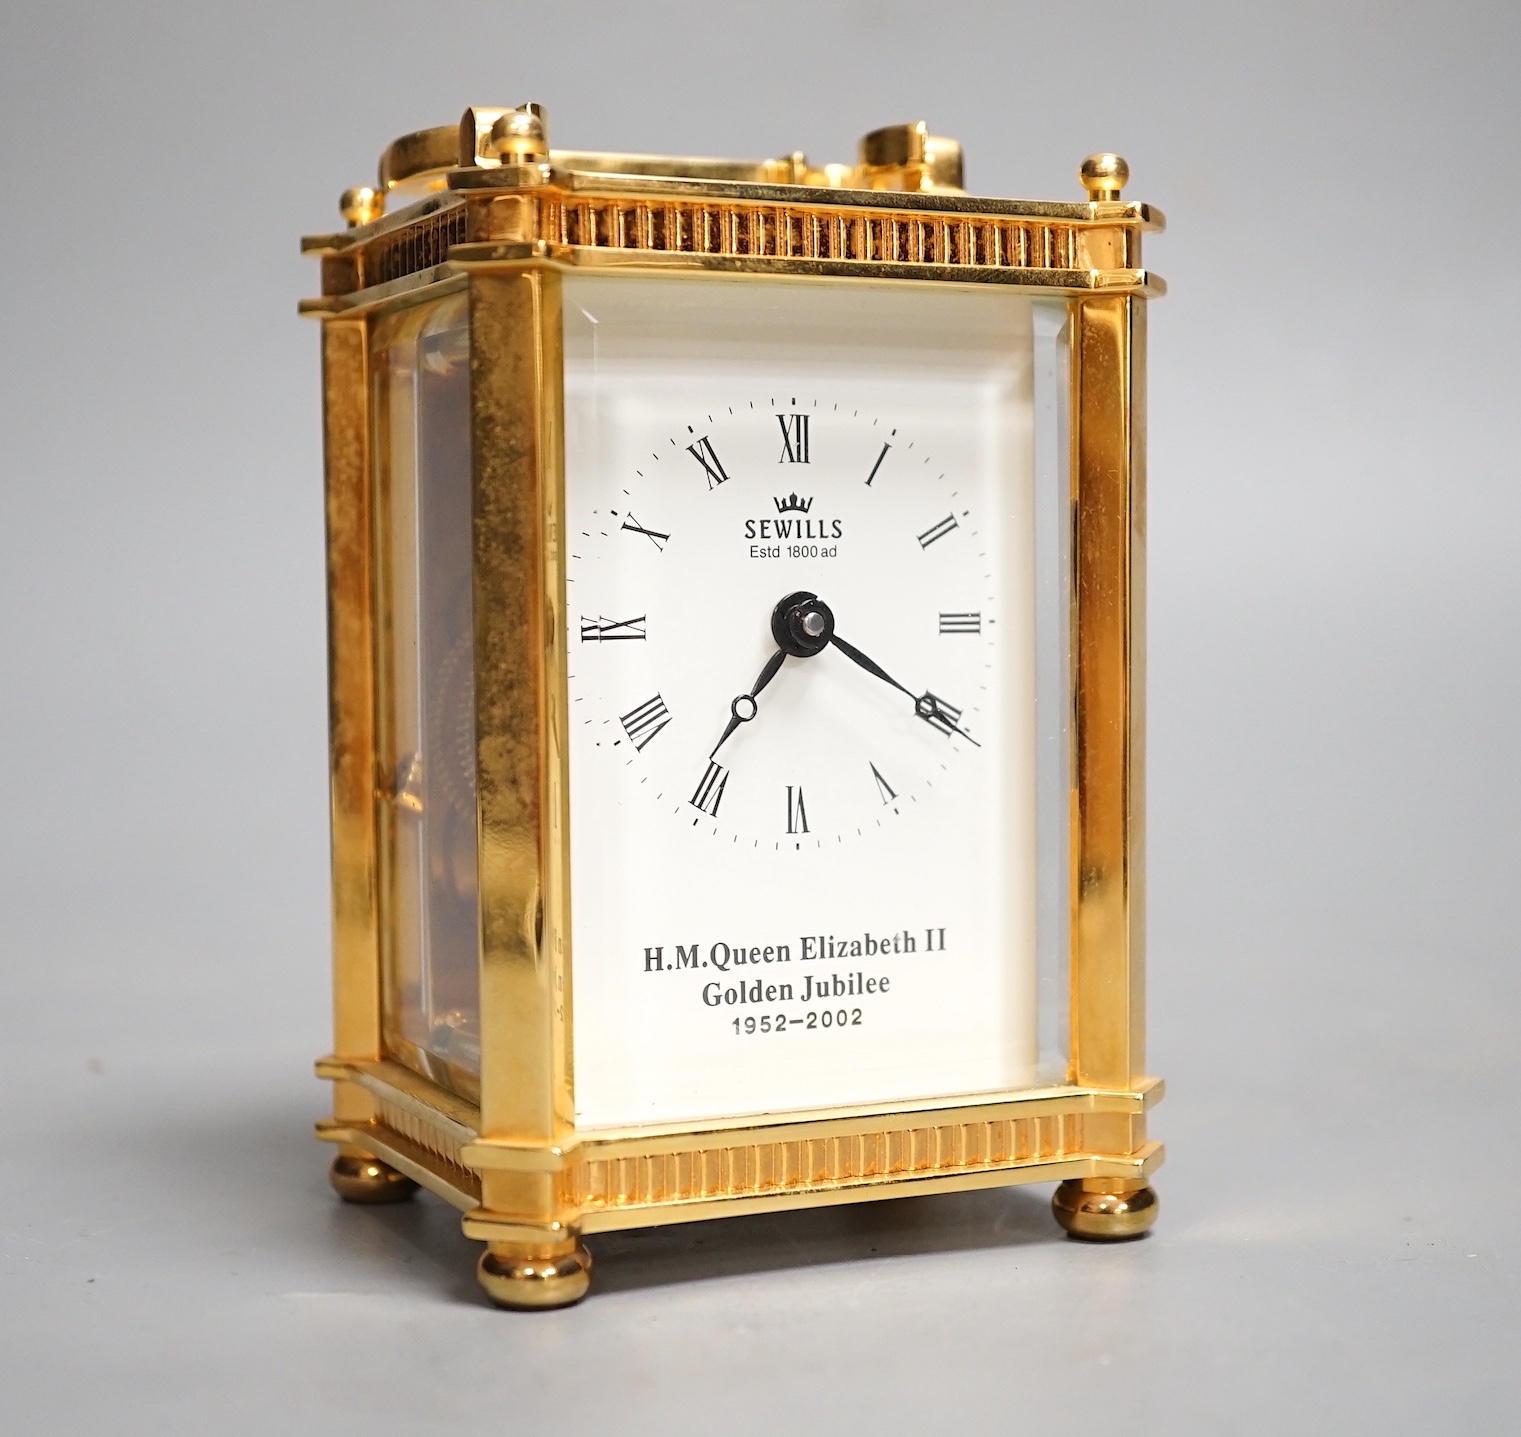 A Golden Jubilee commemorative carriage timepiece, retailed by Sewills - 12cm high